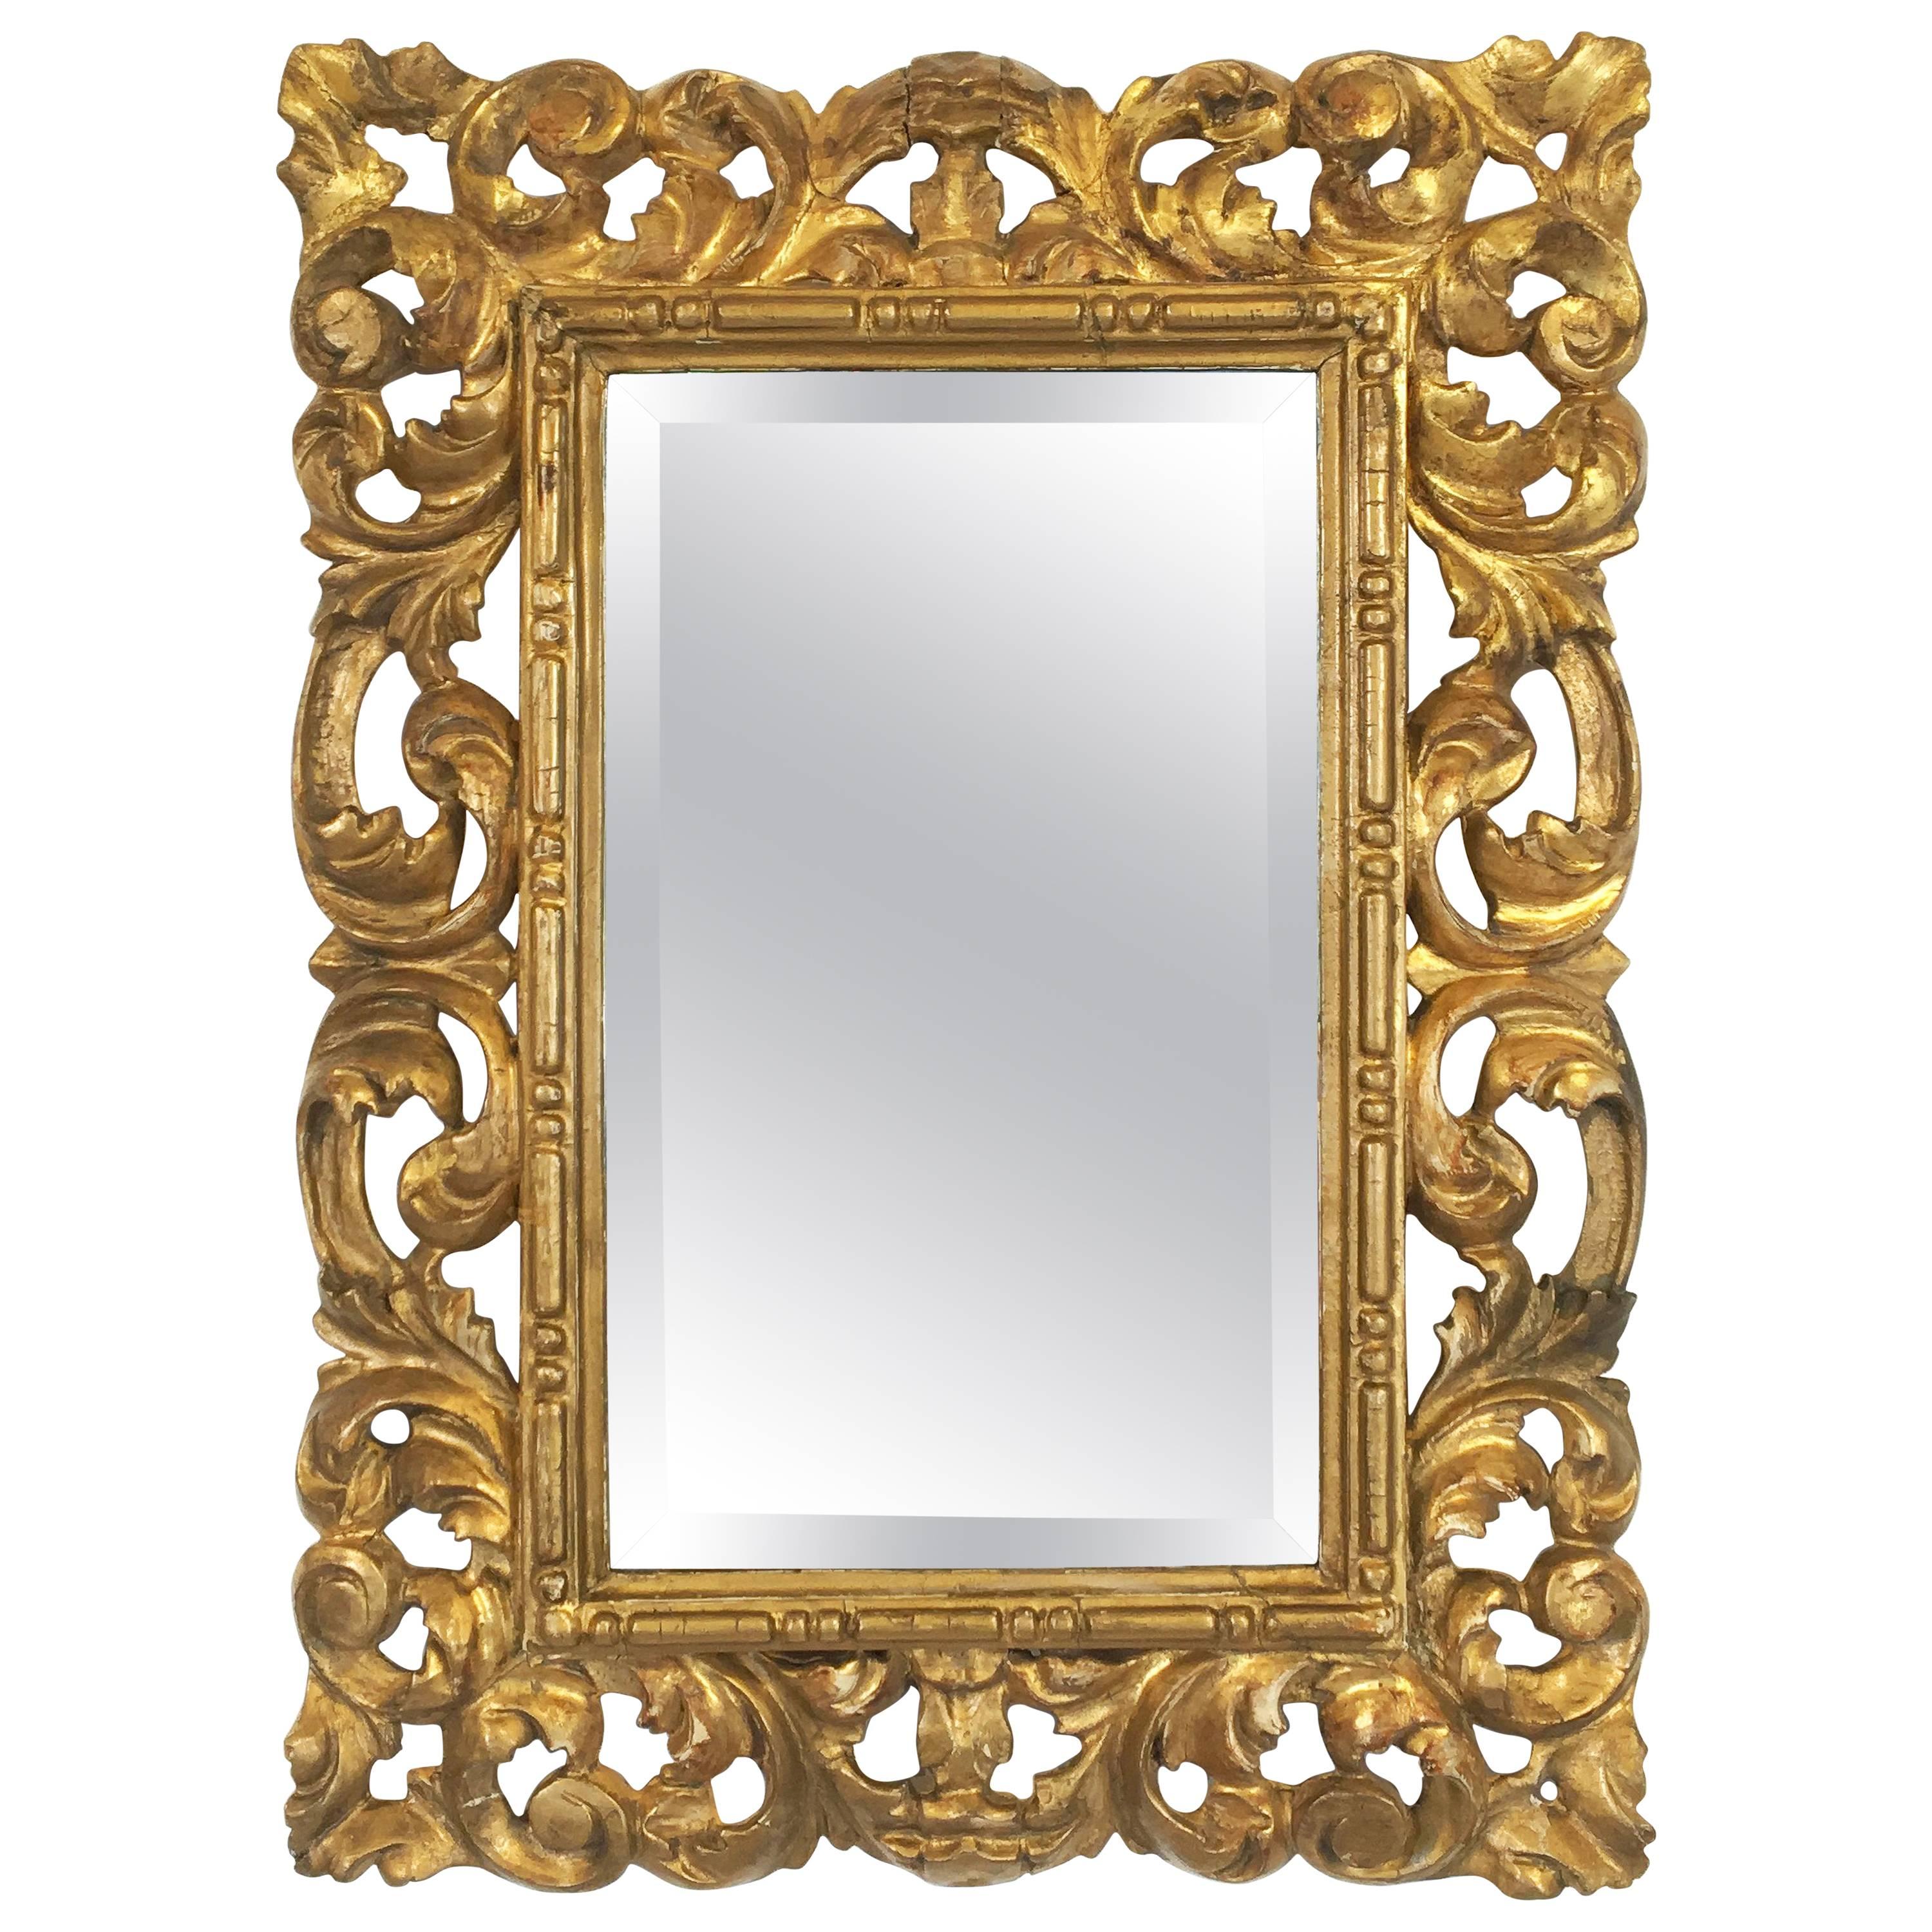 Rococo Beveled Mirror with Carved Giltwood Frame (H 22 1/2 x W 16 1/2)